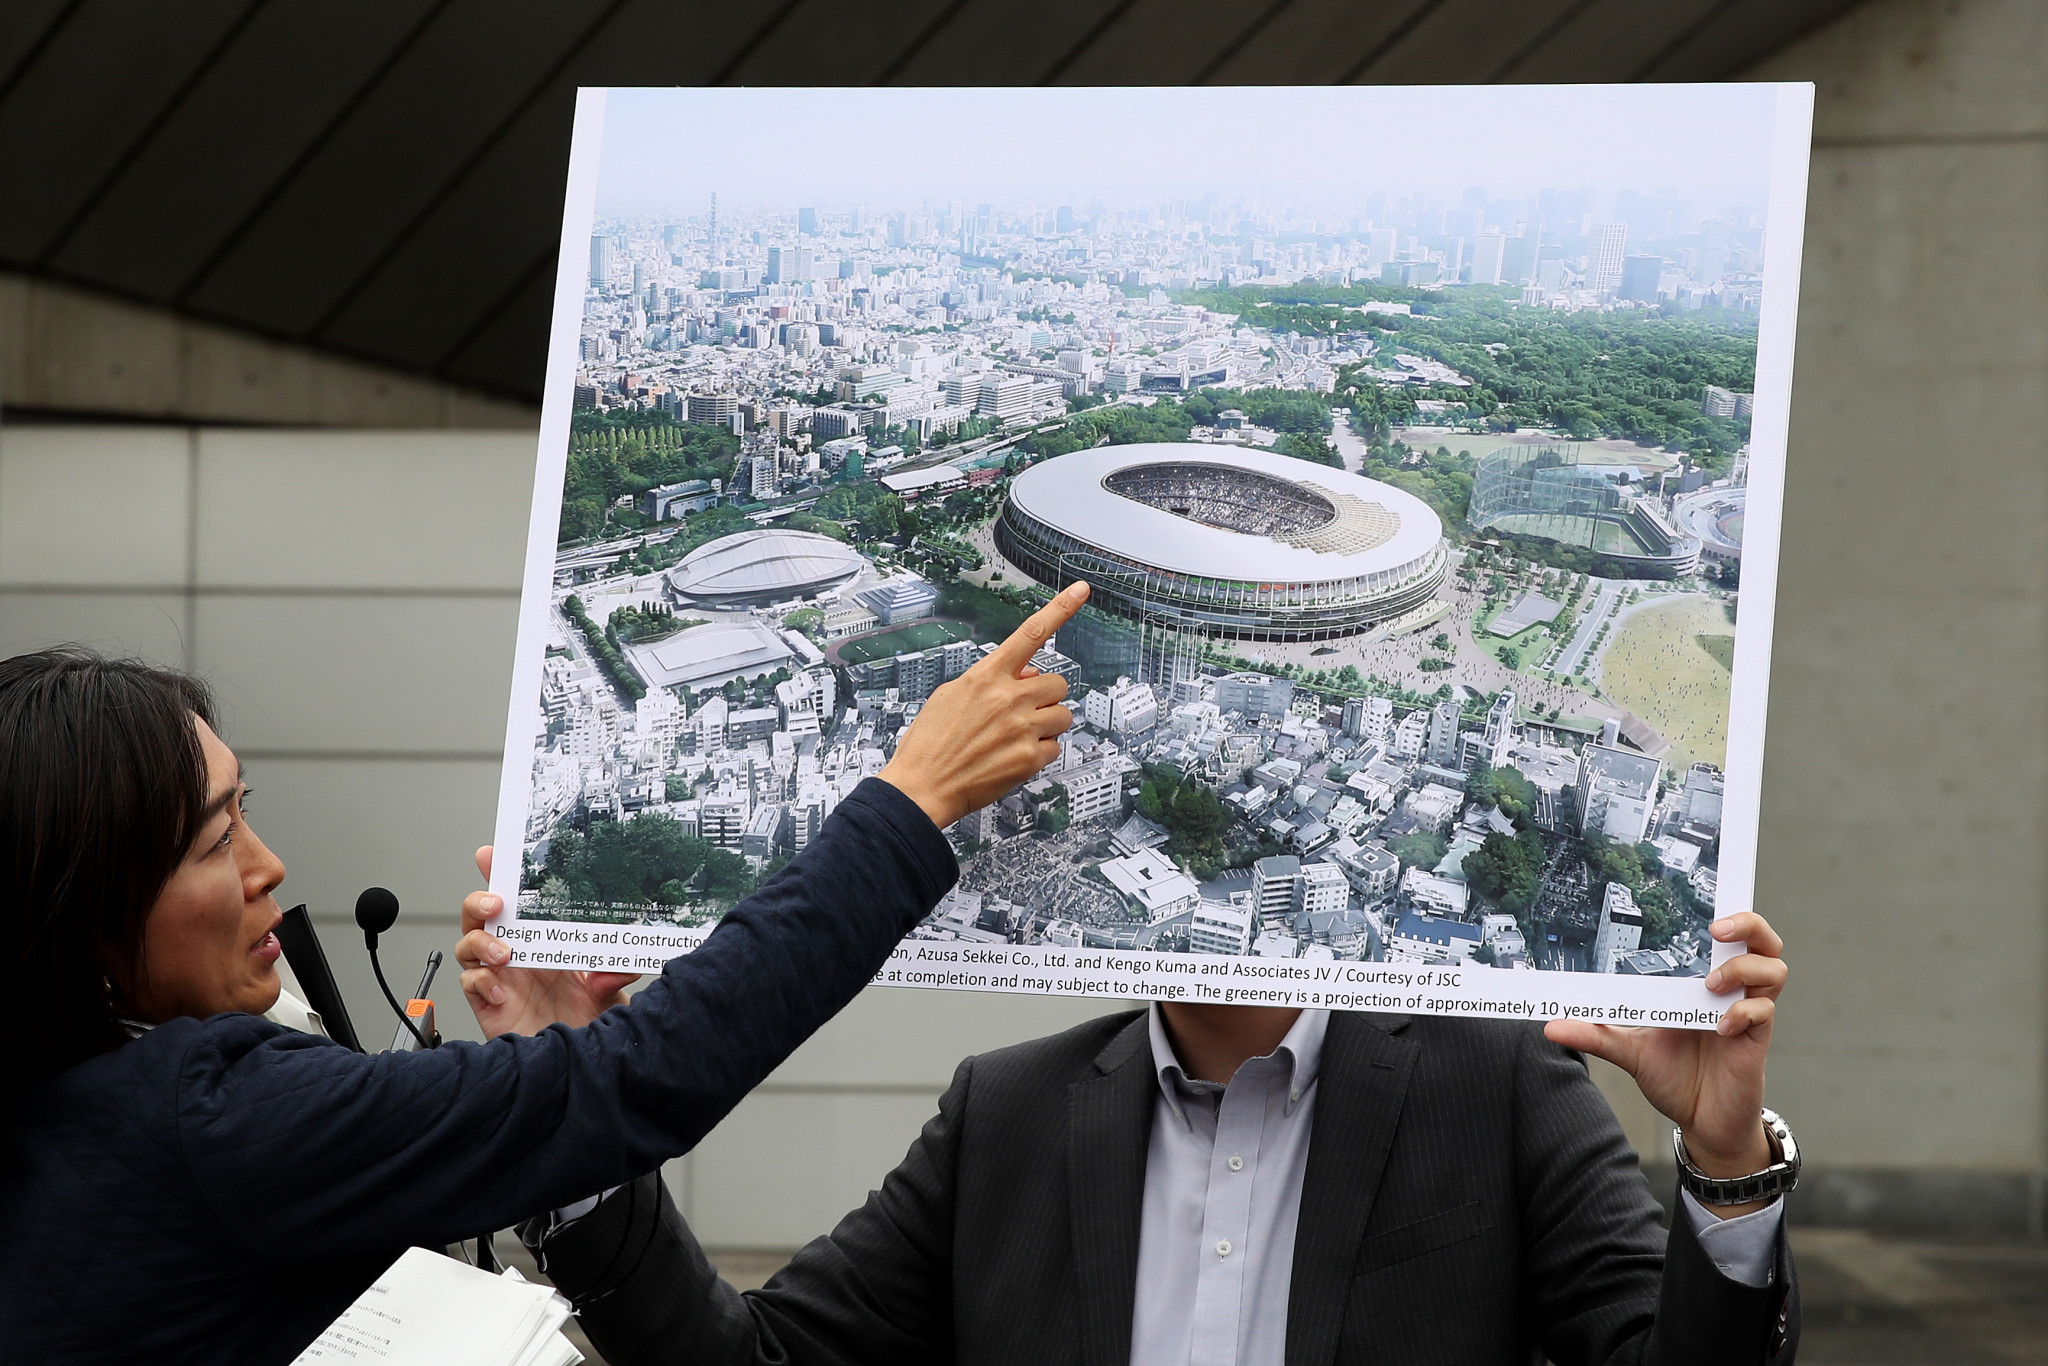 Tokyo 2020 organisers told journalists at the World Press Briefing that construction at the Olympic New National Stadium would be finished by the end of November ©Getty Images 